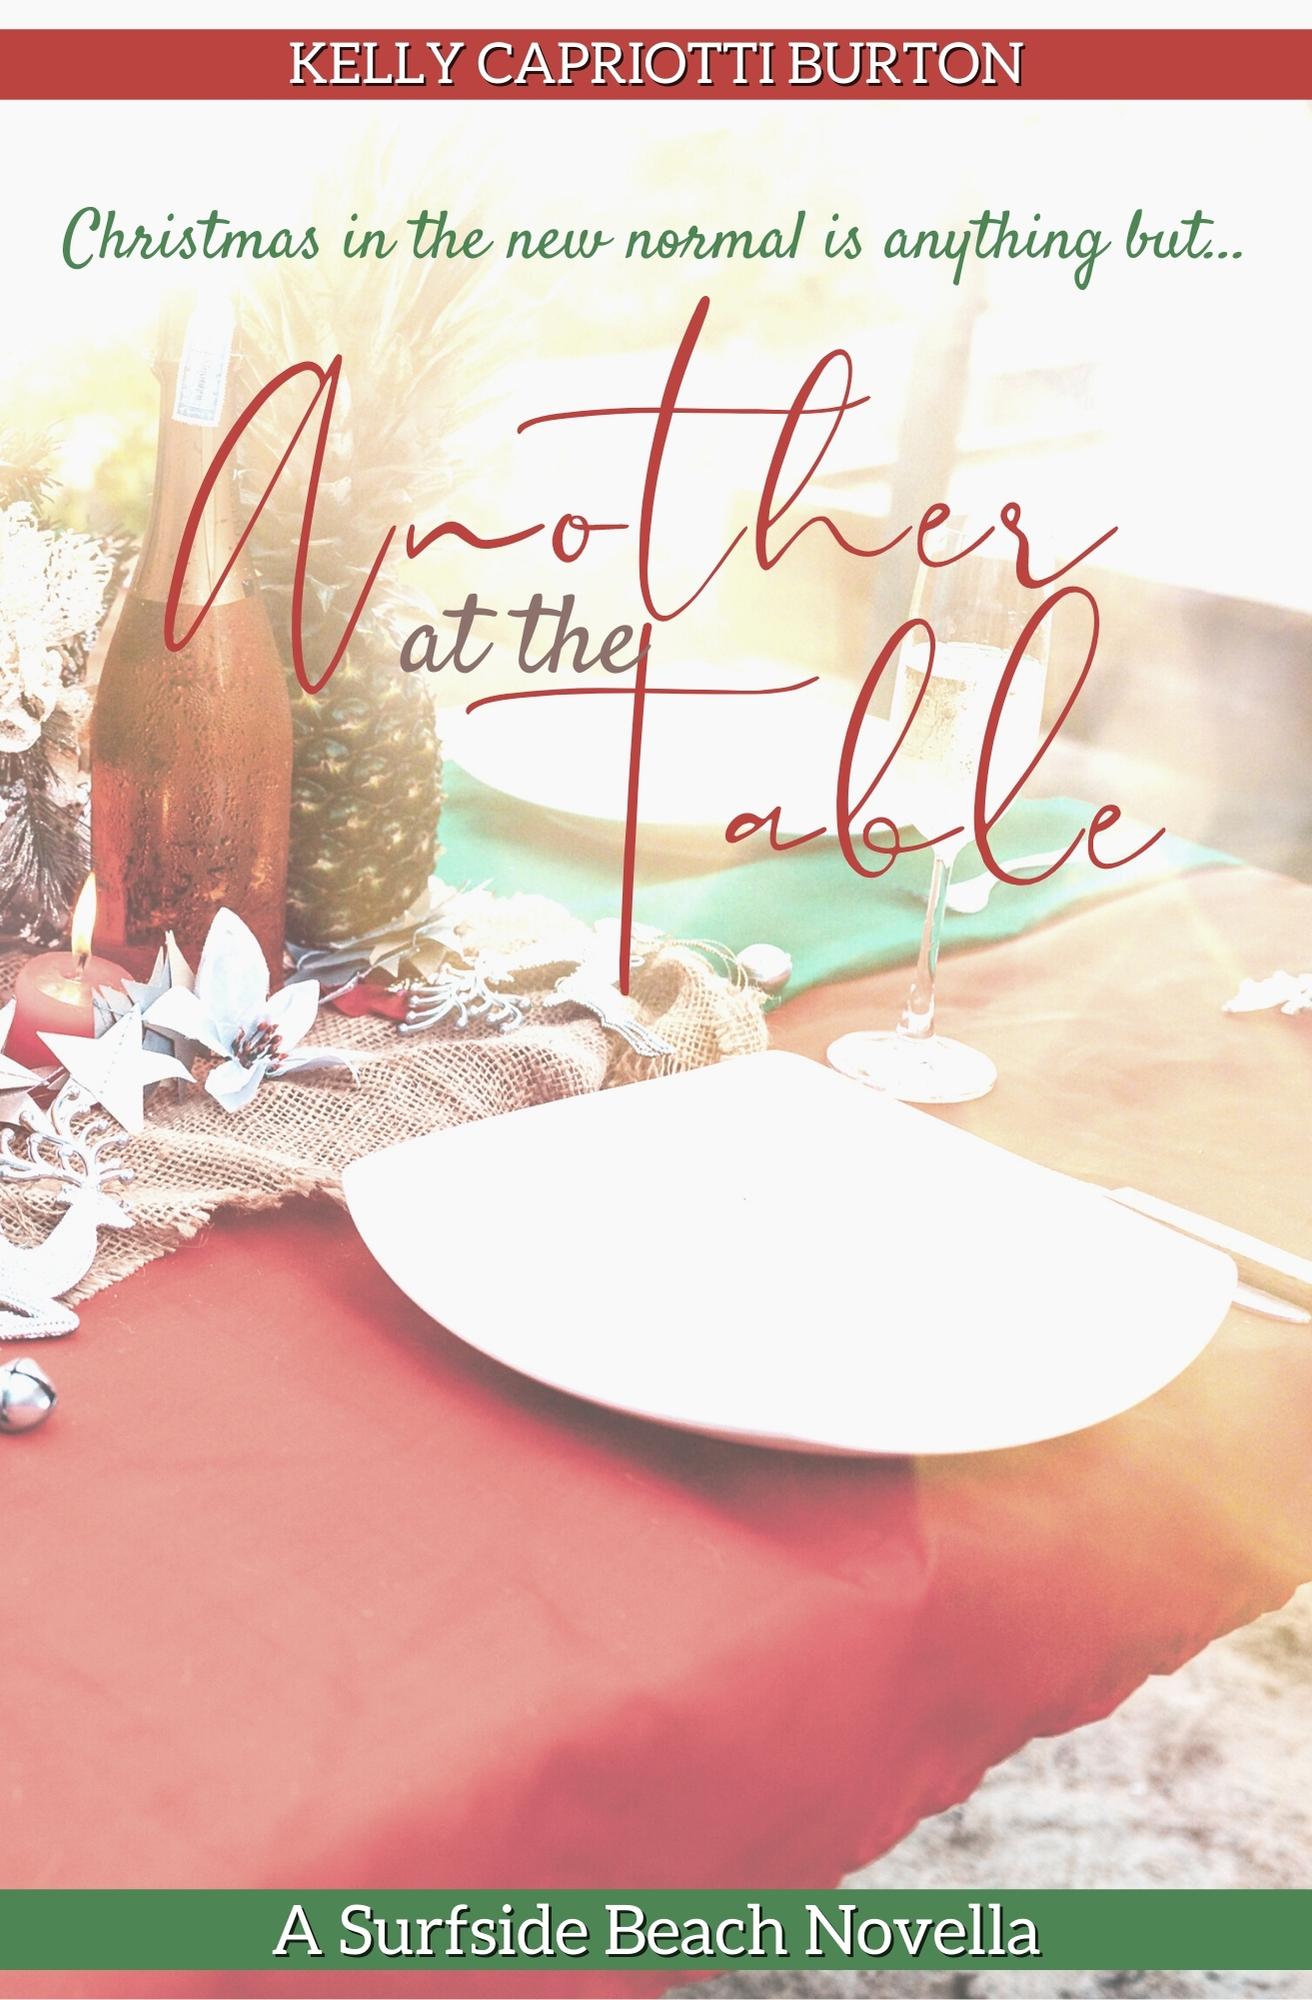 Book 2: Another at the table (Novella)